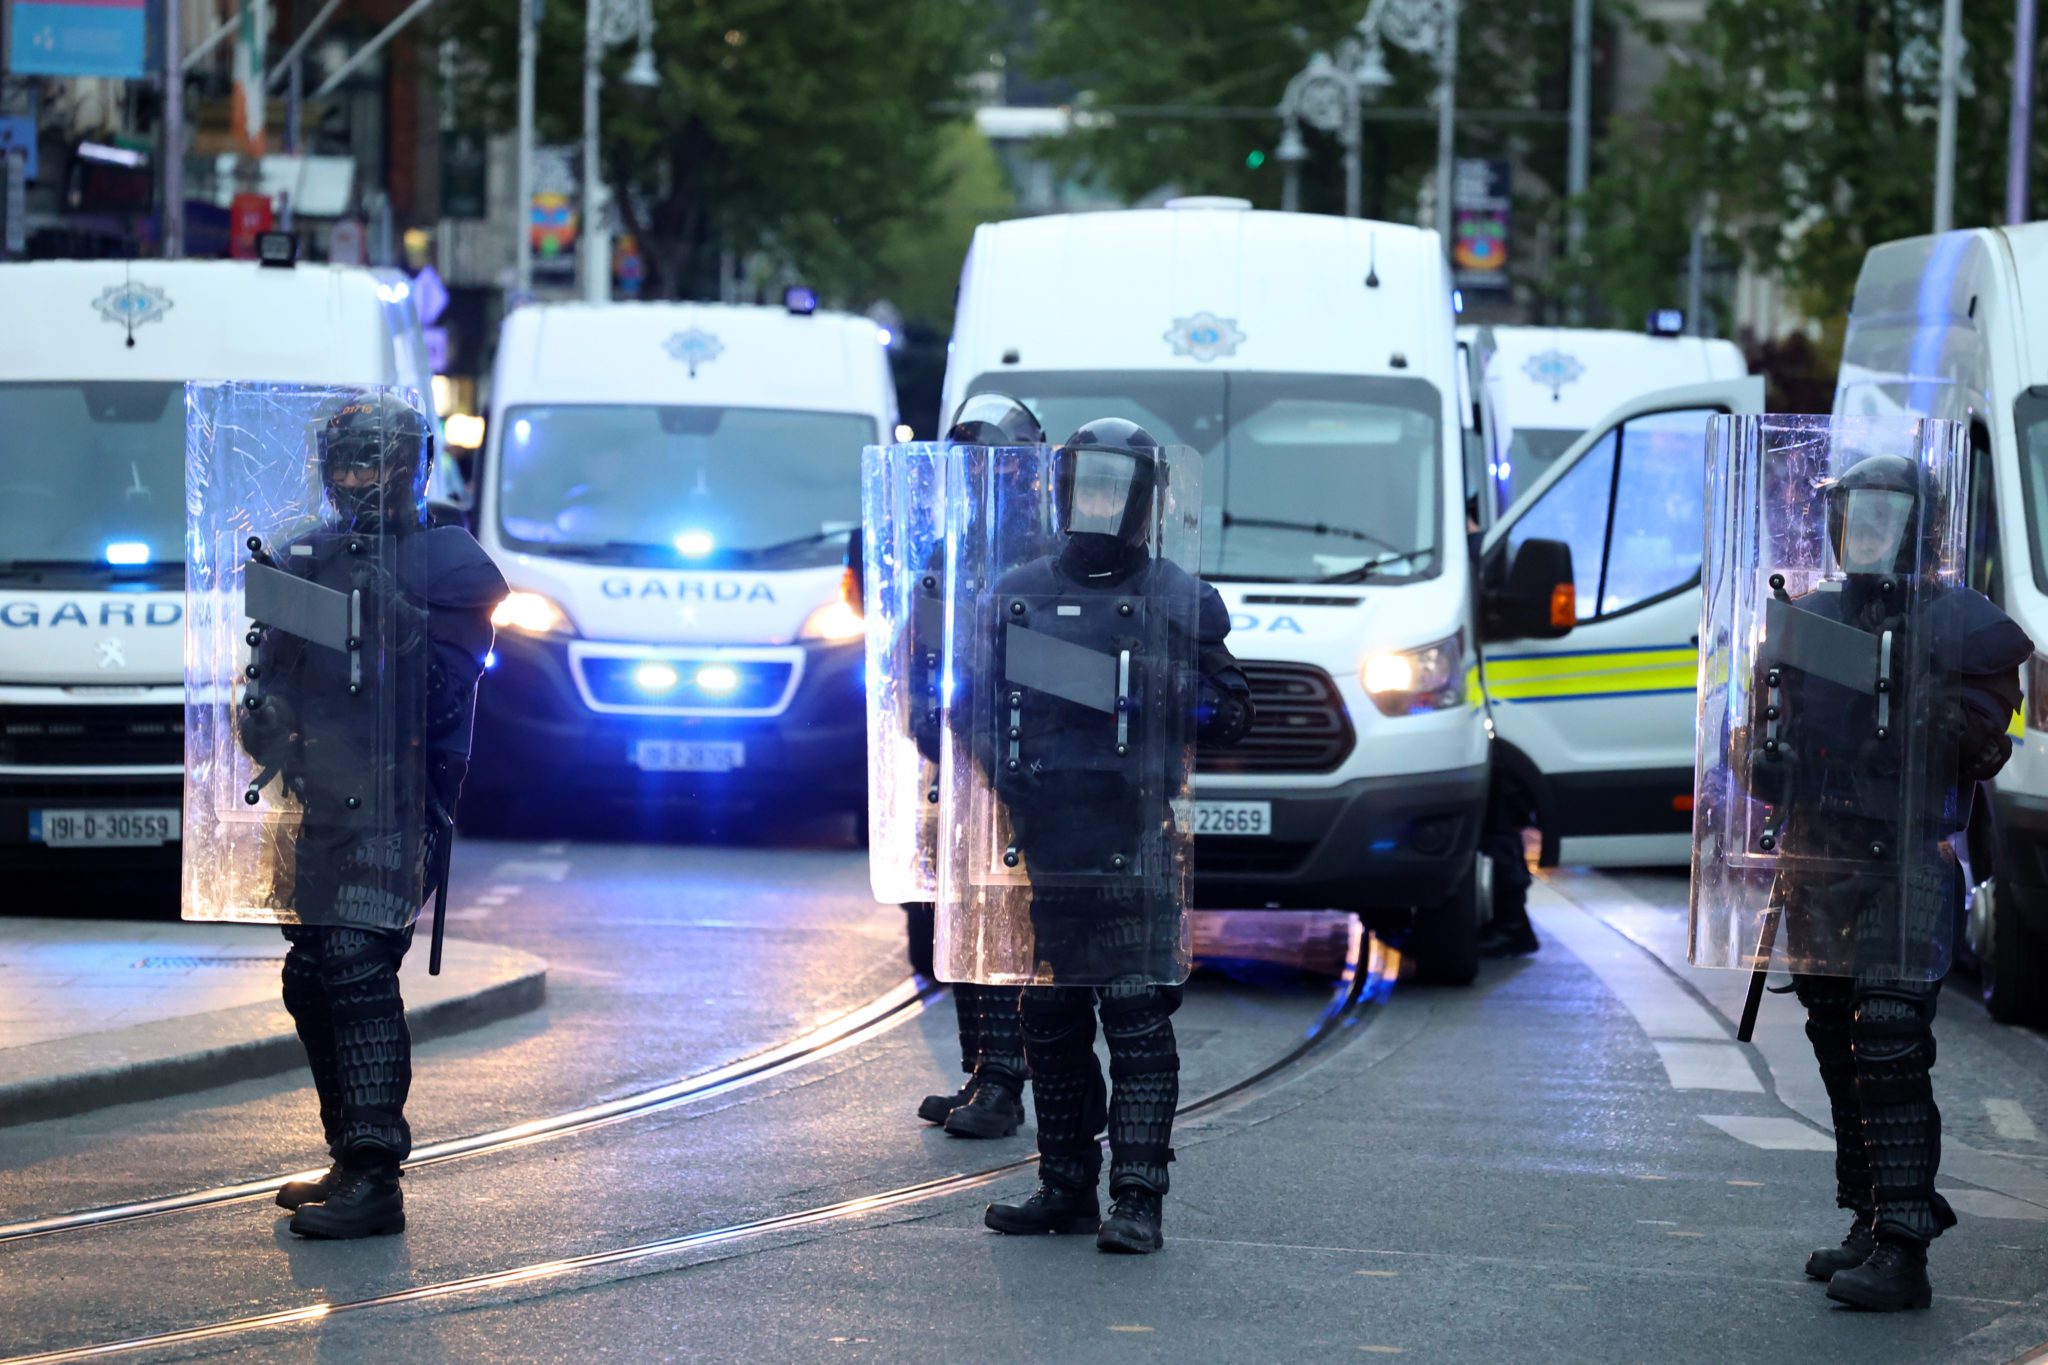 Dublin unrest Full review of Garda response needed to see 'if we can